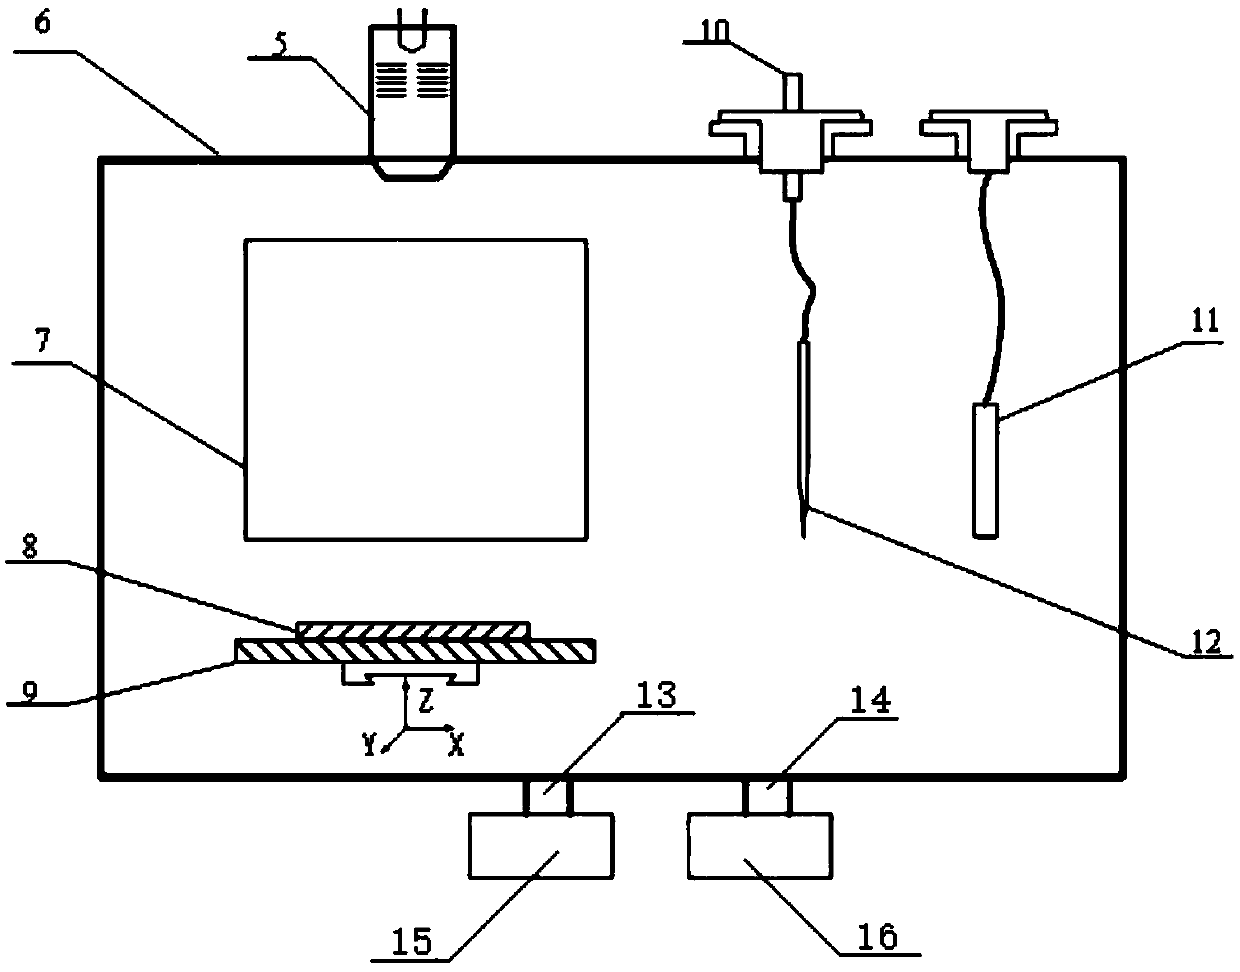 Integrated measuring device for surface dielectric properties of solid insulating materials